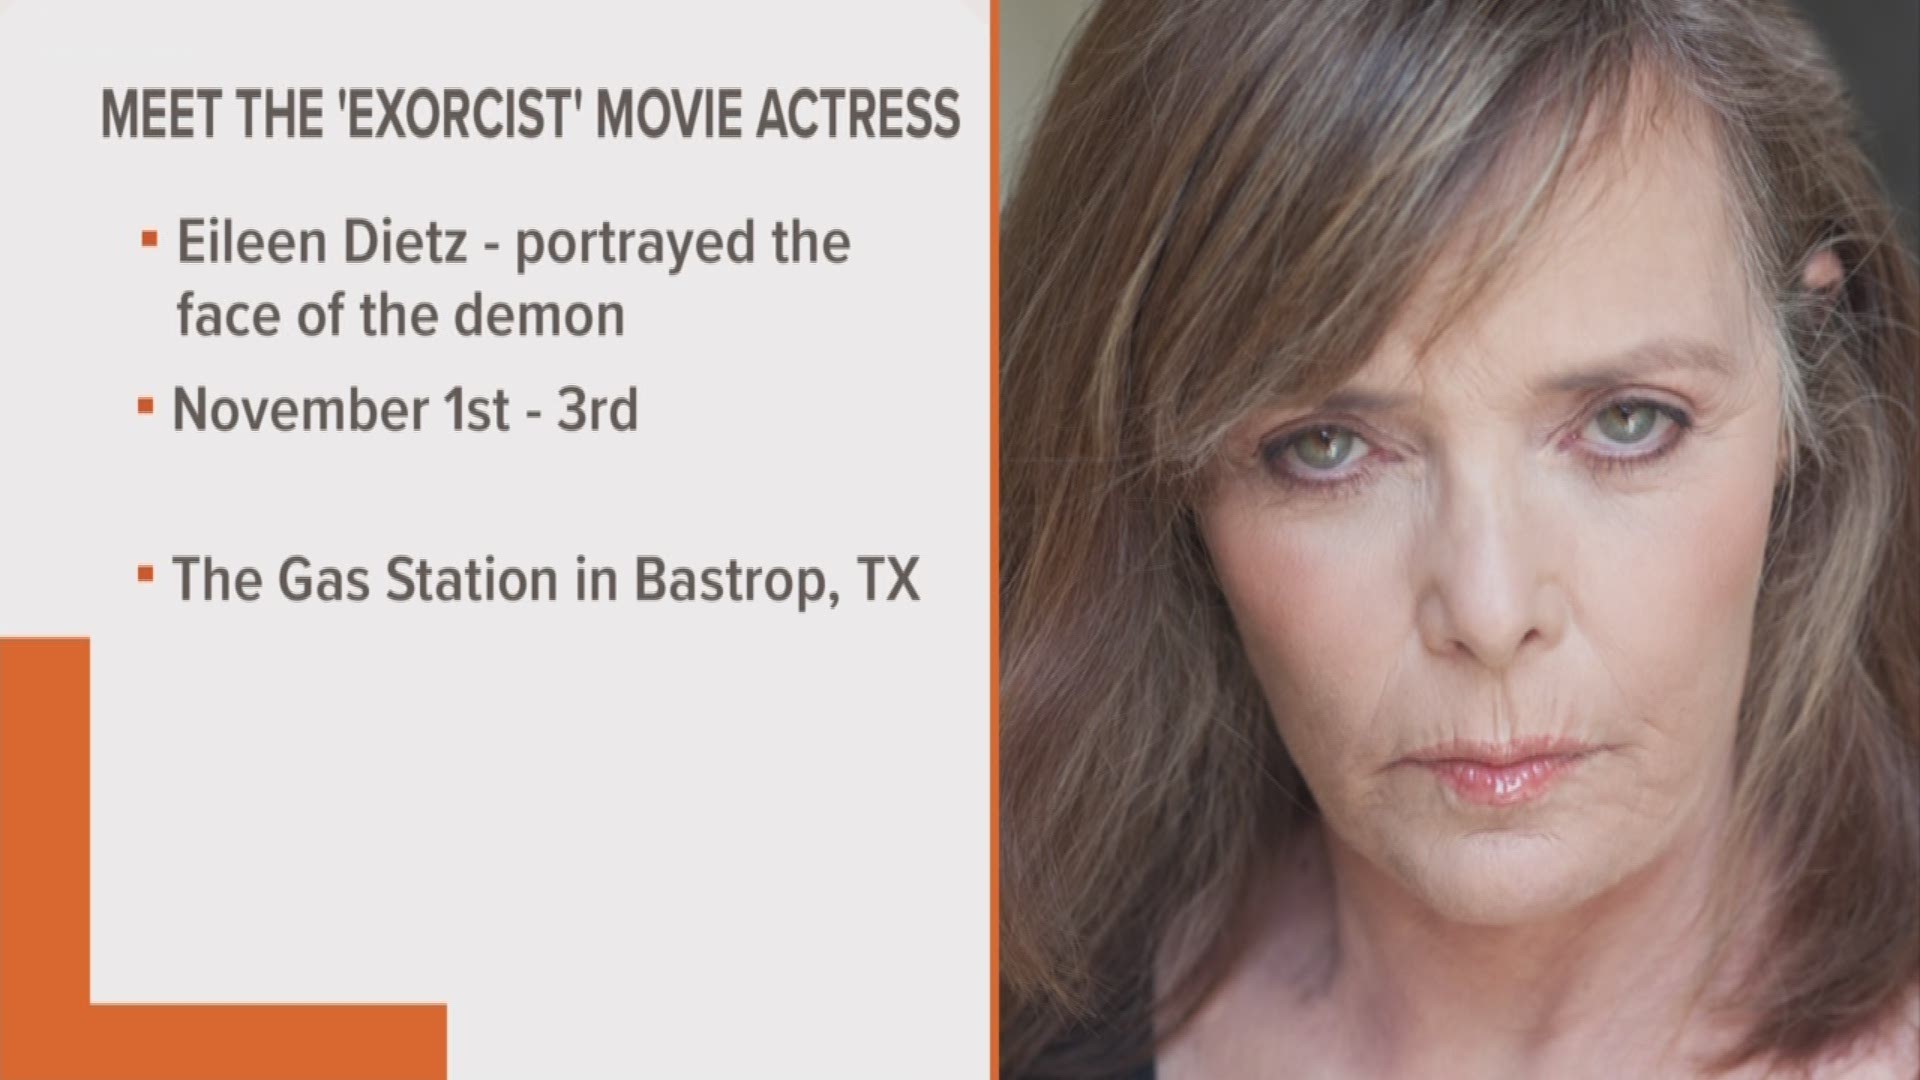 Actress Eileen Dietz plays the face of the demon in the Exorcist movie and you could meet her at the iconic Gas Station in Bastrop.